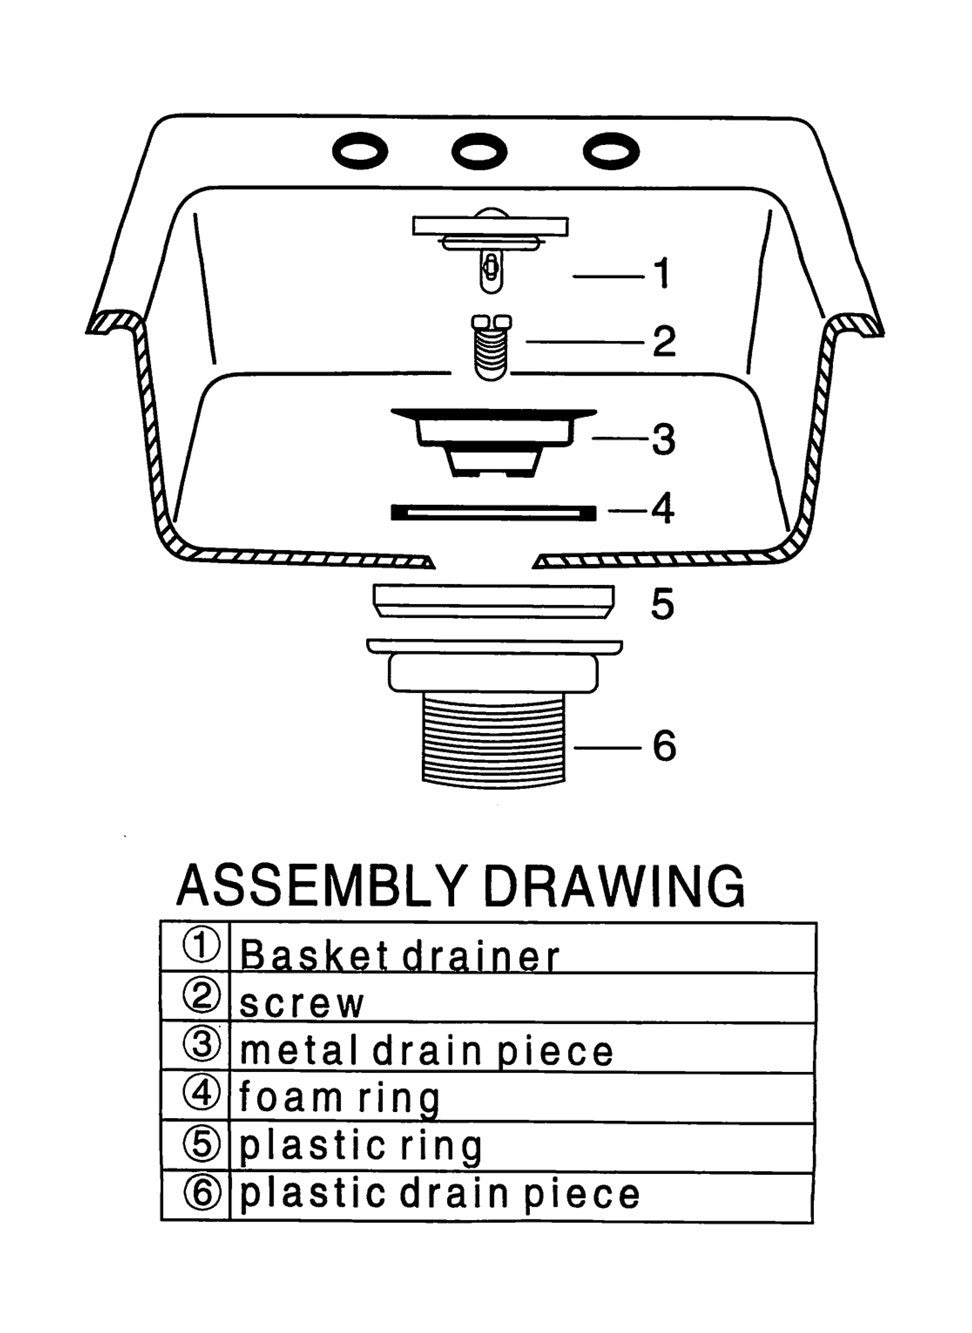 Technical drawings for BAI 1267 Kitchen Sink Strainer with Basket